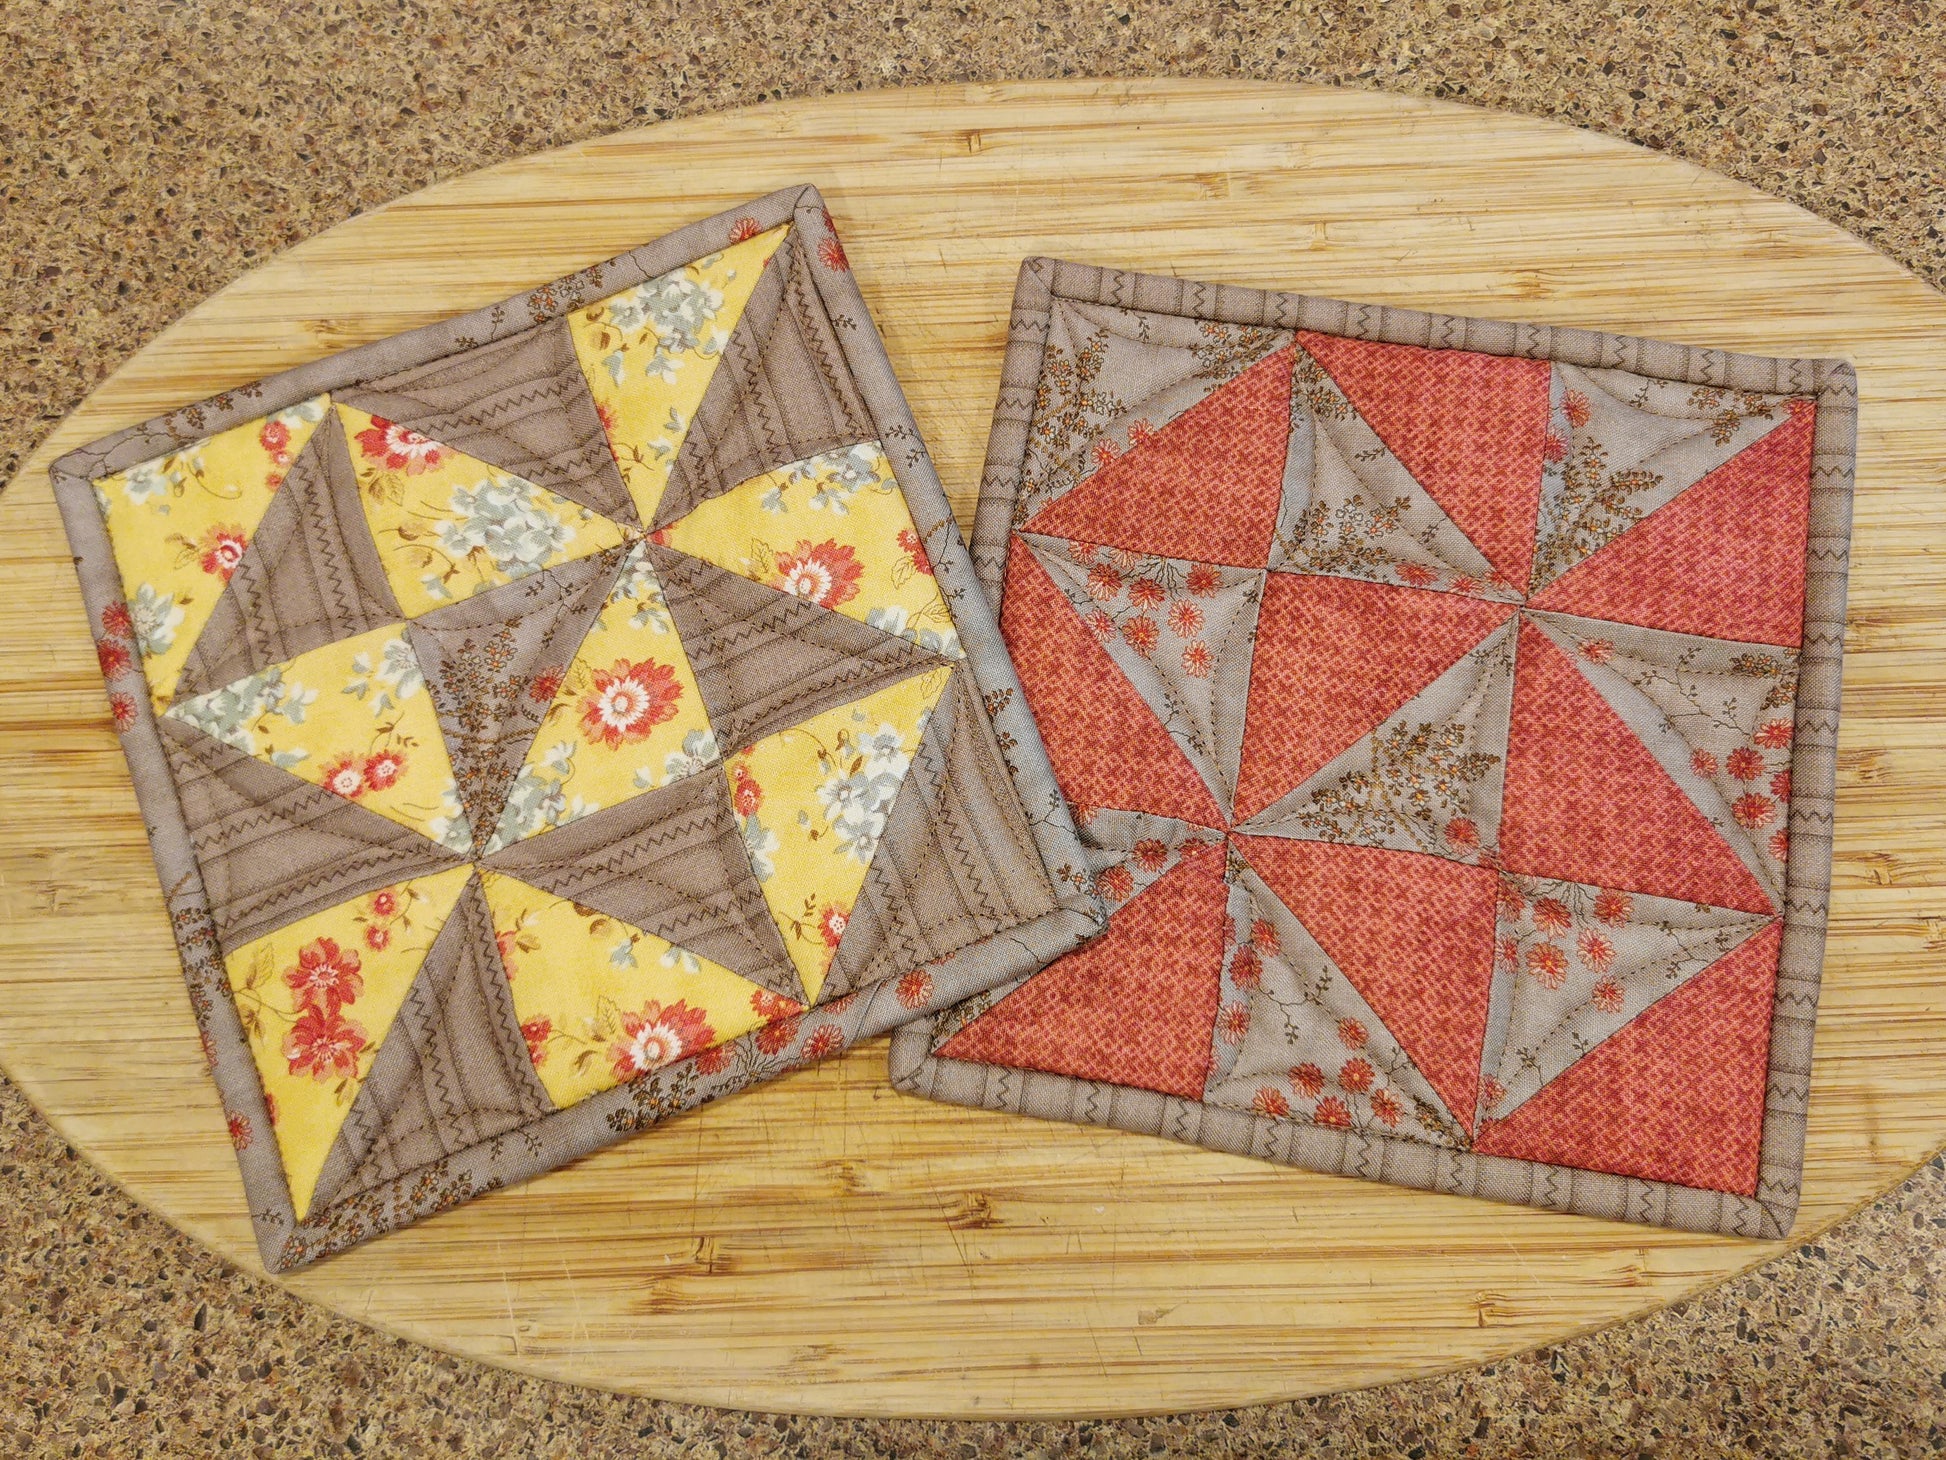 the quilted patchwork potholders are shown in indoor light which minimizes the quilting texture and allows the patchwork to become predominant, showing the pinwheel piecing and the tan, coral and floral fabrics 